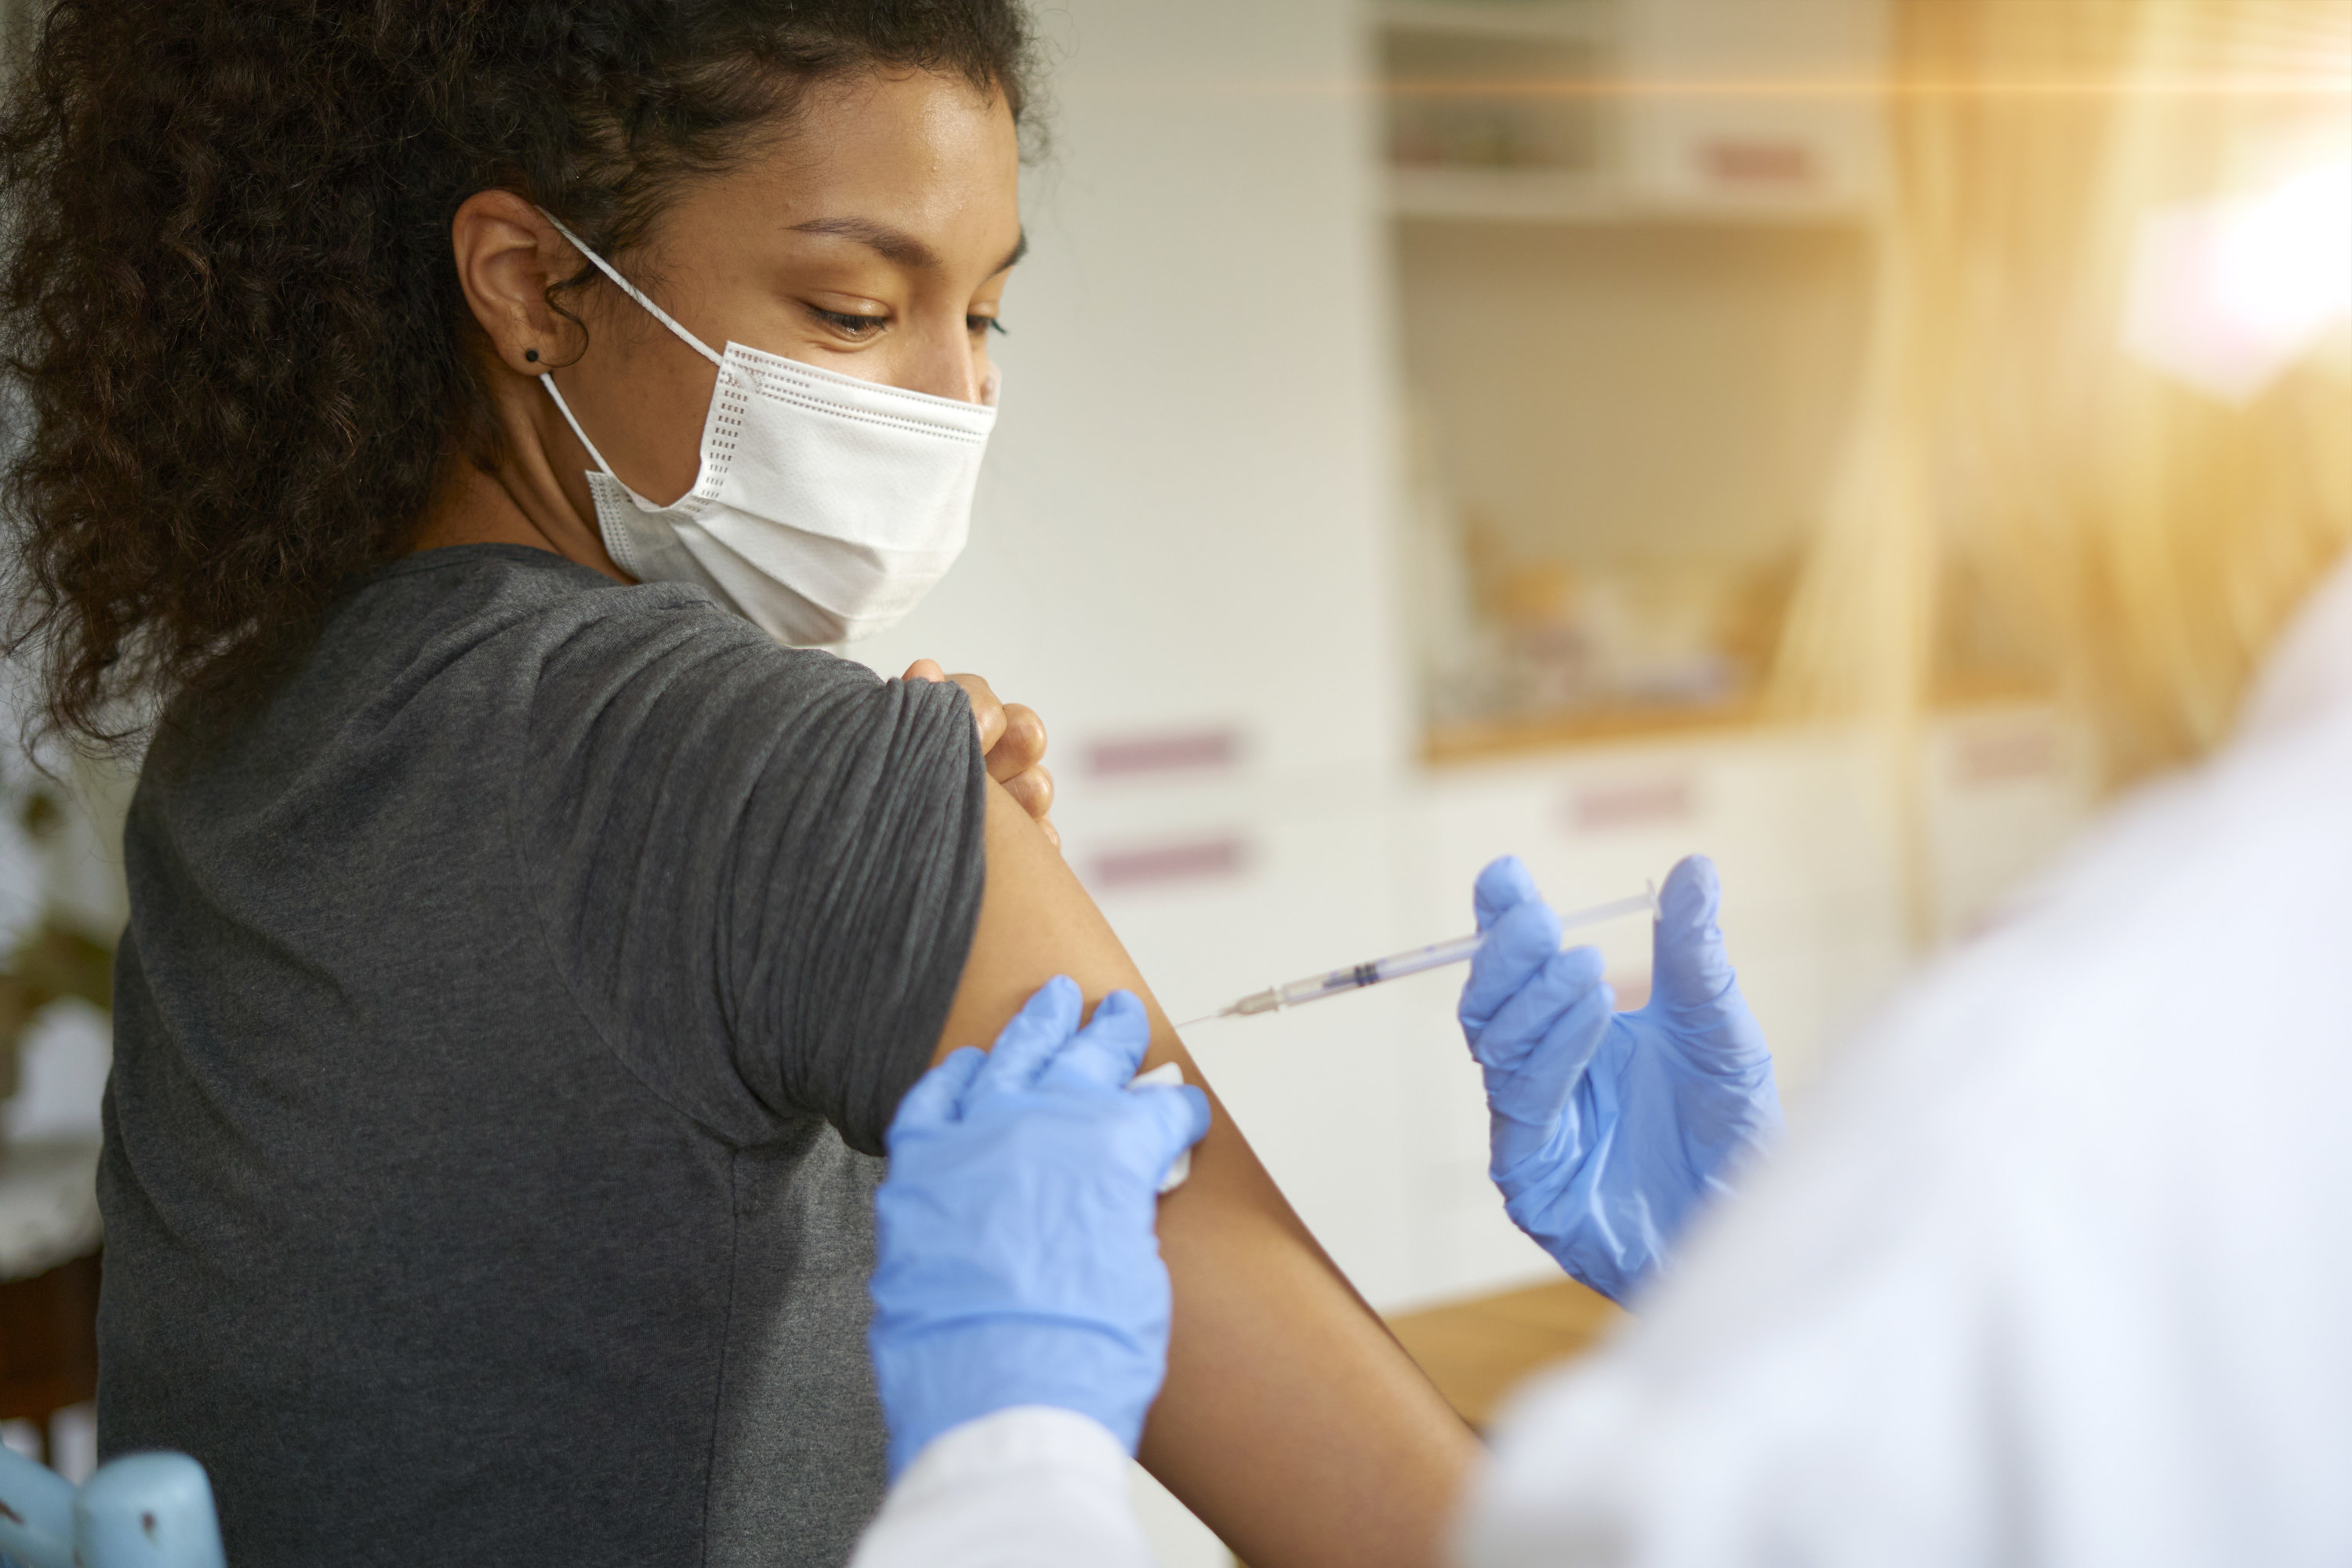 An image of a woman in a face mask getting a shot in her arm of the COVID-19 vaccine